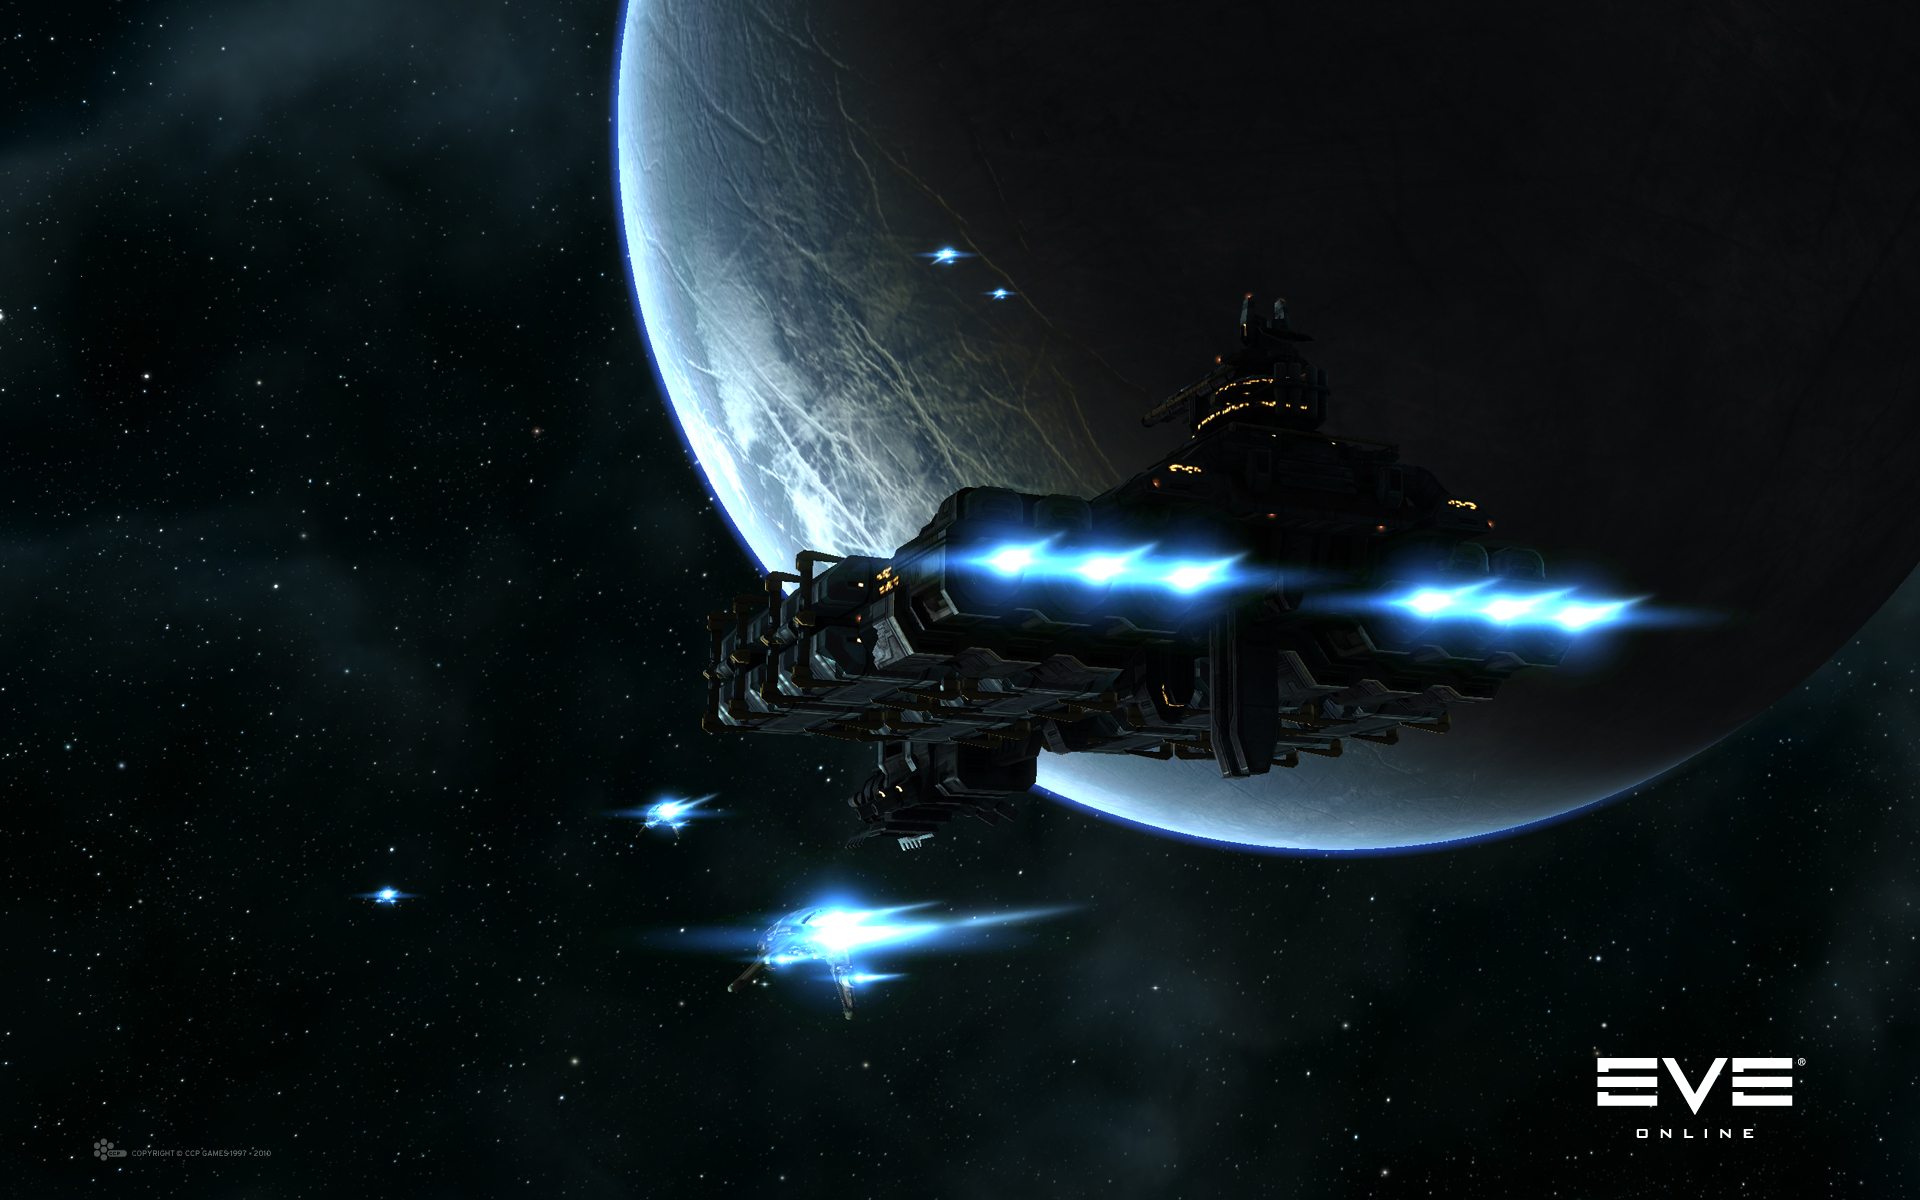 Eve Online Ships Wallpaper For Pc Other Games